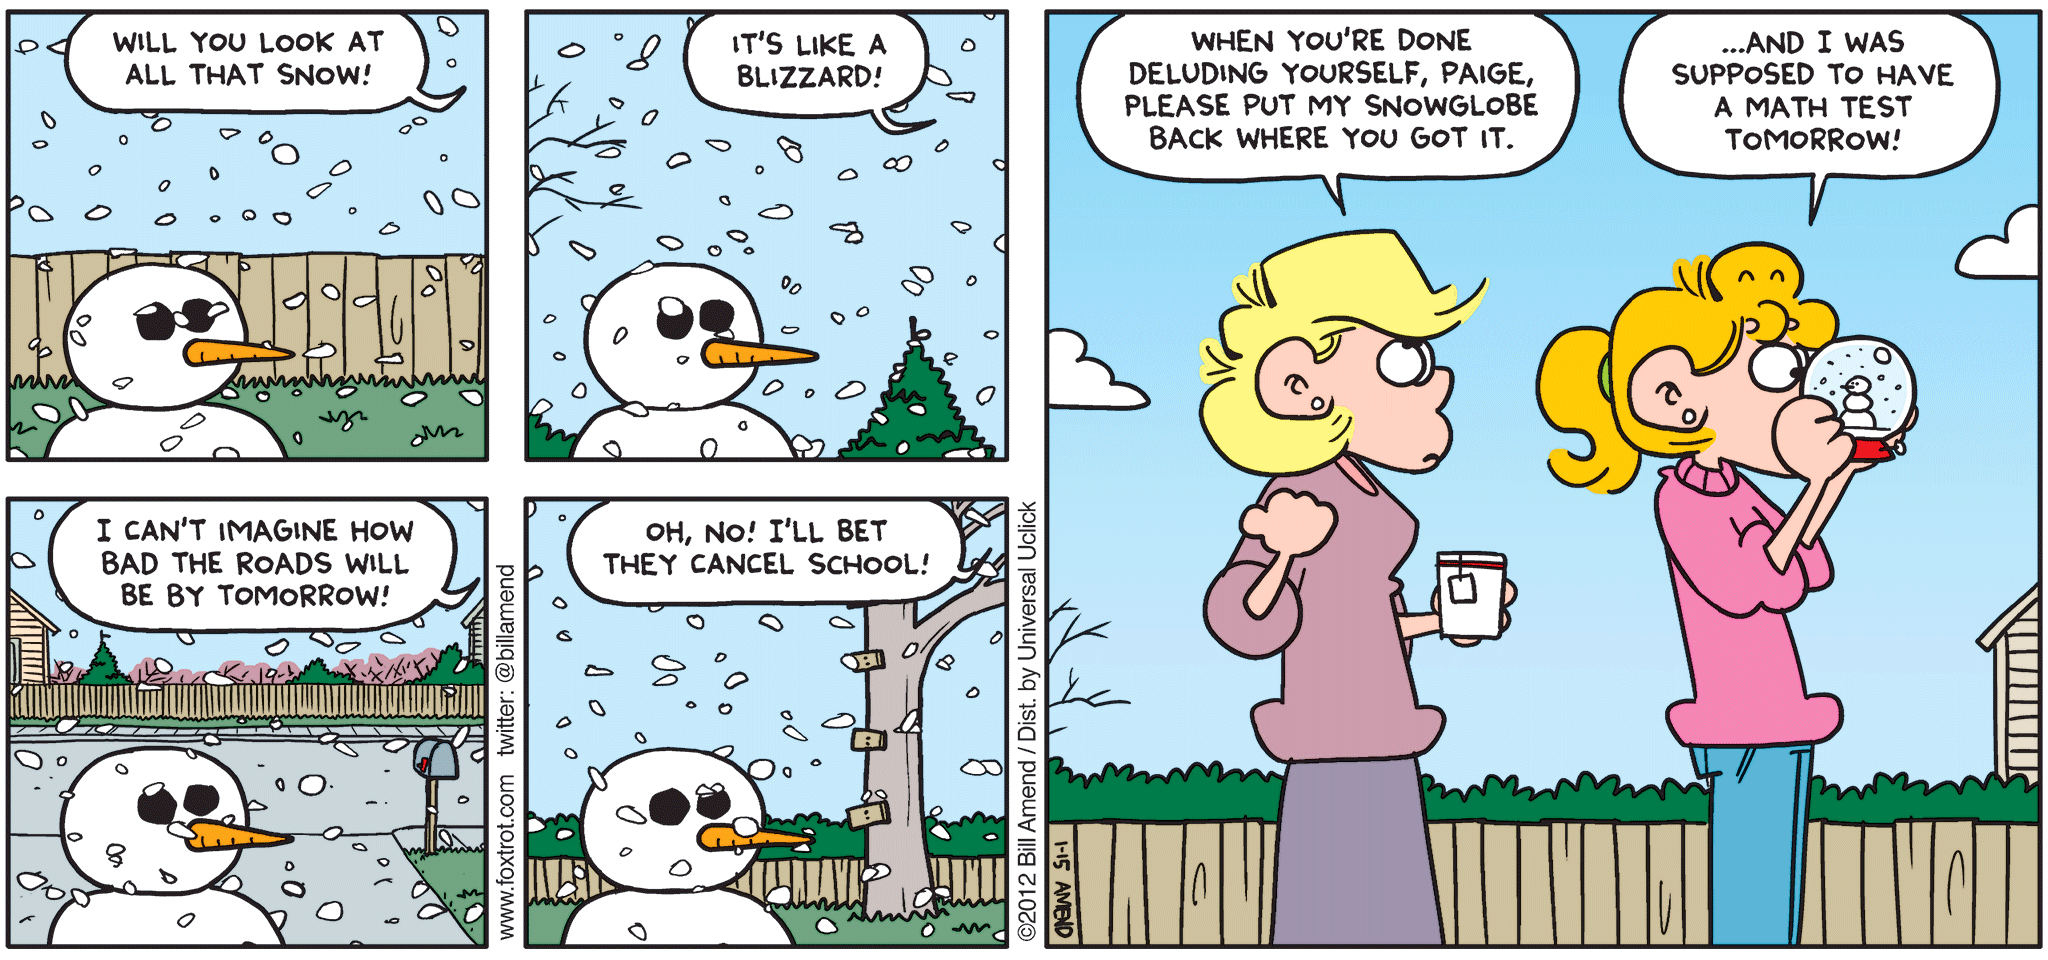 FoxTrot comic strip by Bill Amend - "Global Weather" published January 15, 2012 - Paige: Will you look at all that snow? It's like a blizzard! I can't imagine how bad the roads will be by tomorrow! Oh, no! I'll bet they cancel school! Andy: When you're done deluding yourself, Paige, please put my snowglobe back where you got it. Paige: ...And I was supposed to have a math test tomorrow!